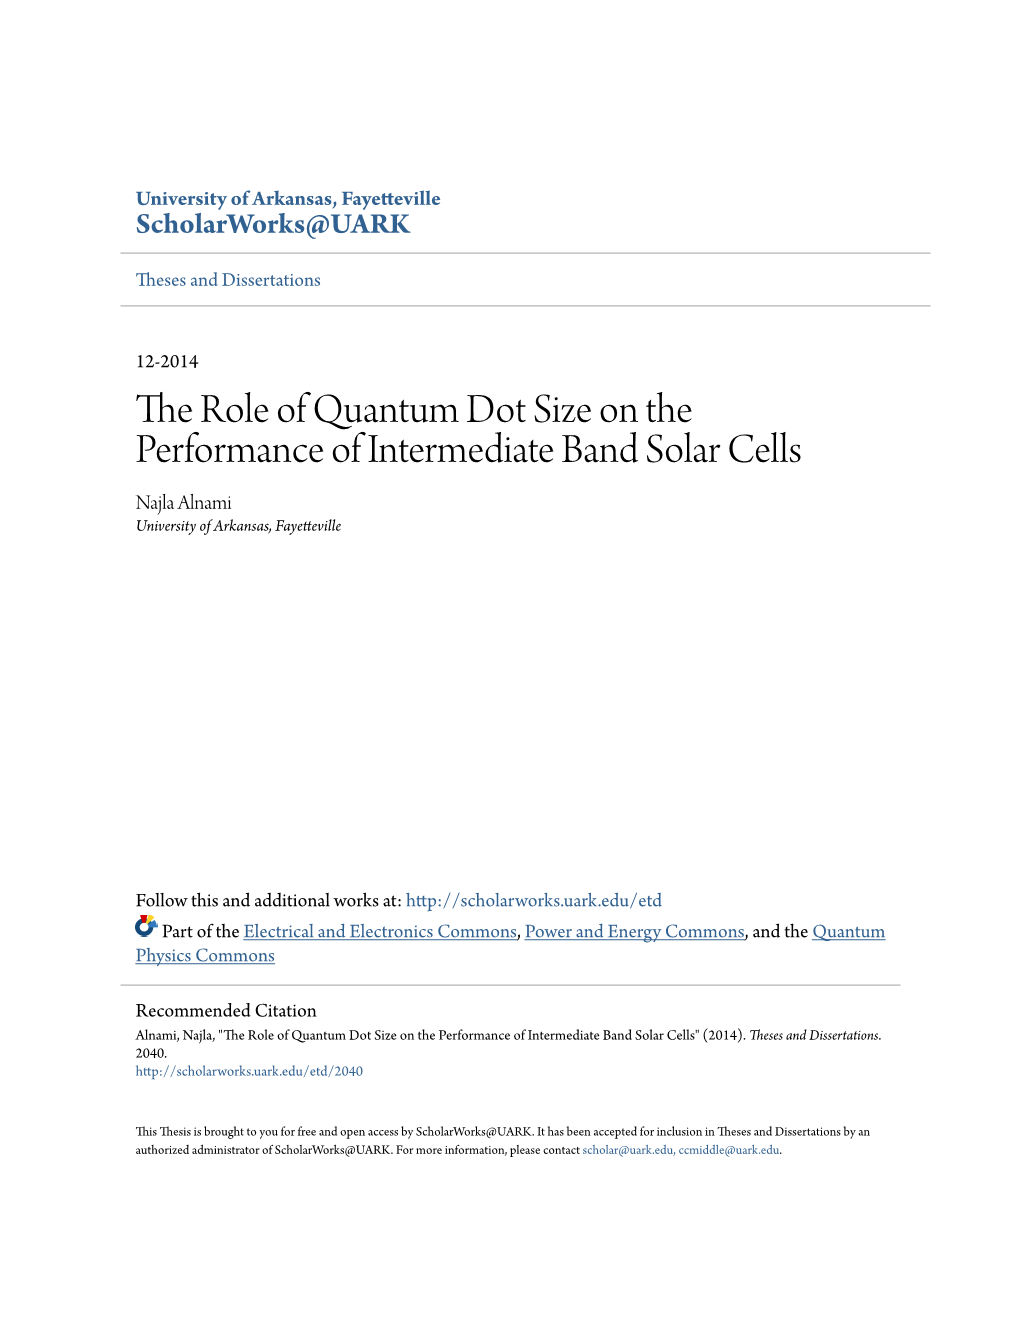 The Role of Quantum Dot Size on the Performance of Intermediate Band Solar Cells Najla Alnami University of Arkansas, Fayetteville